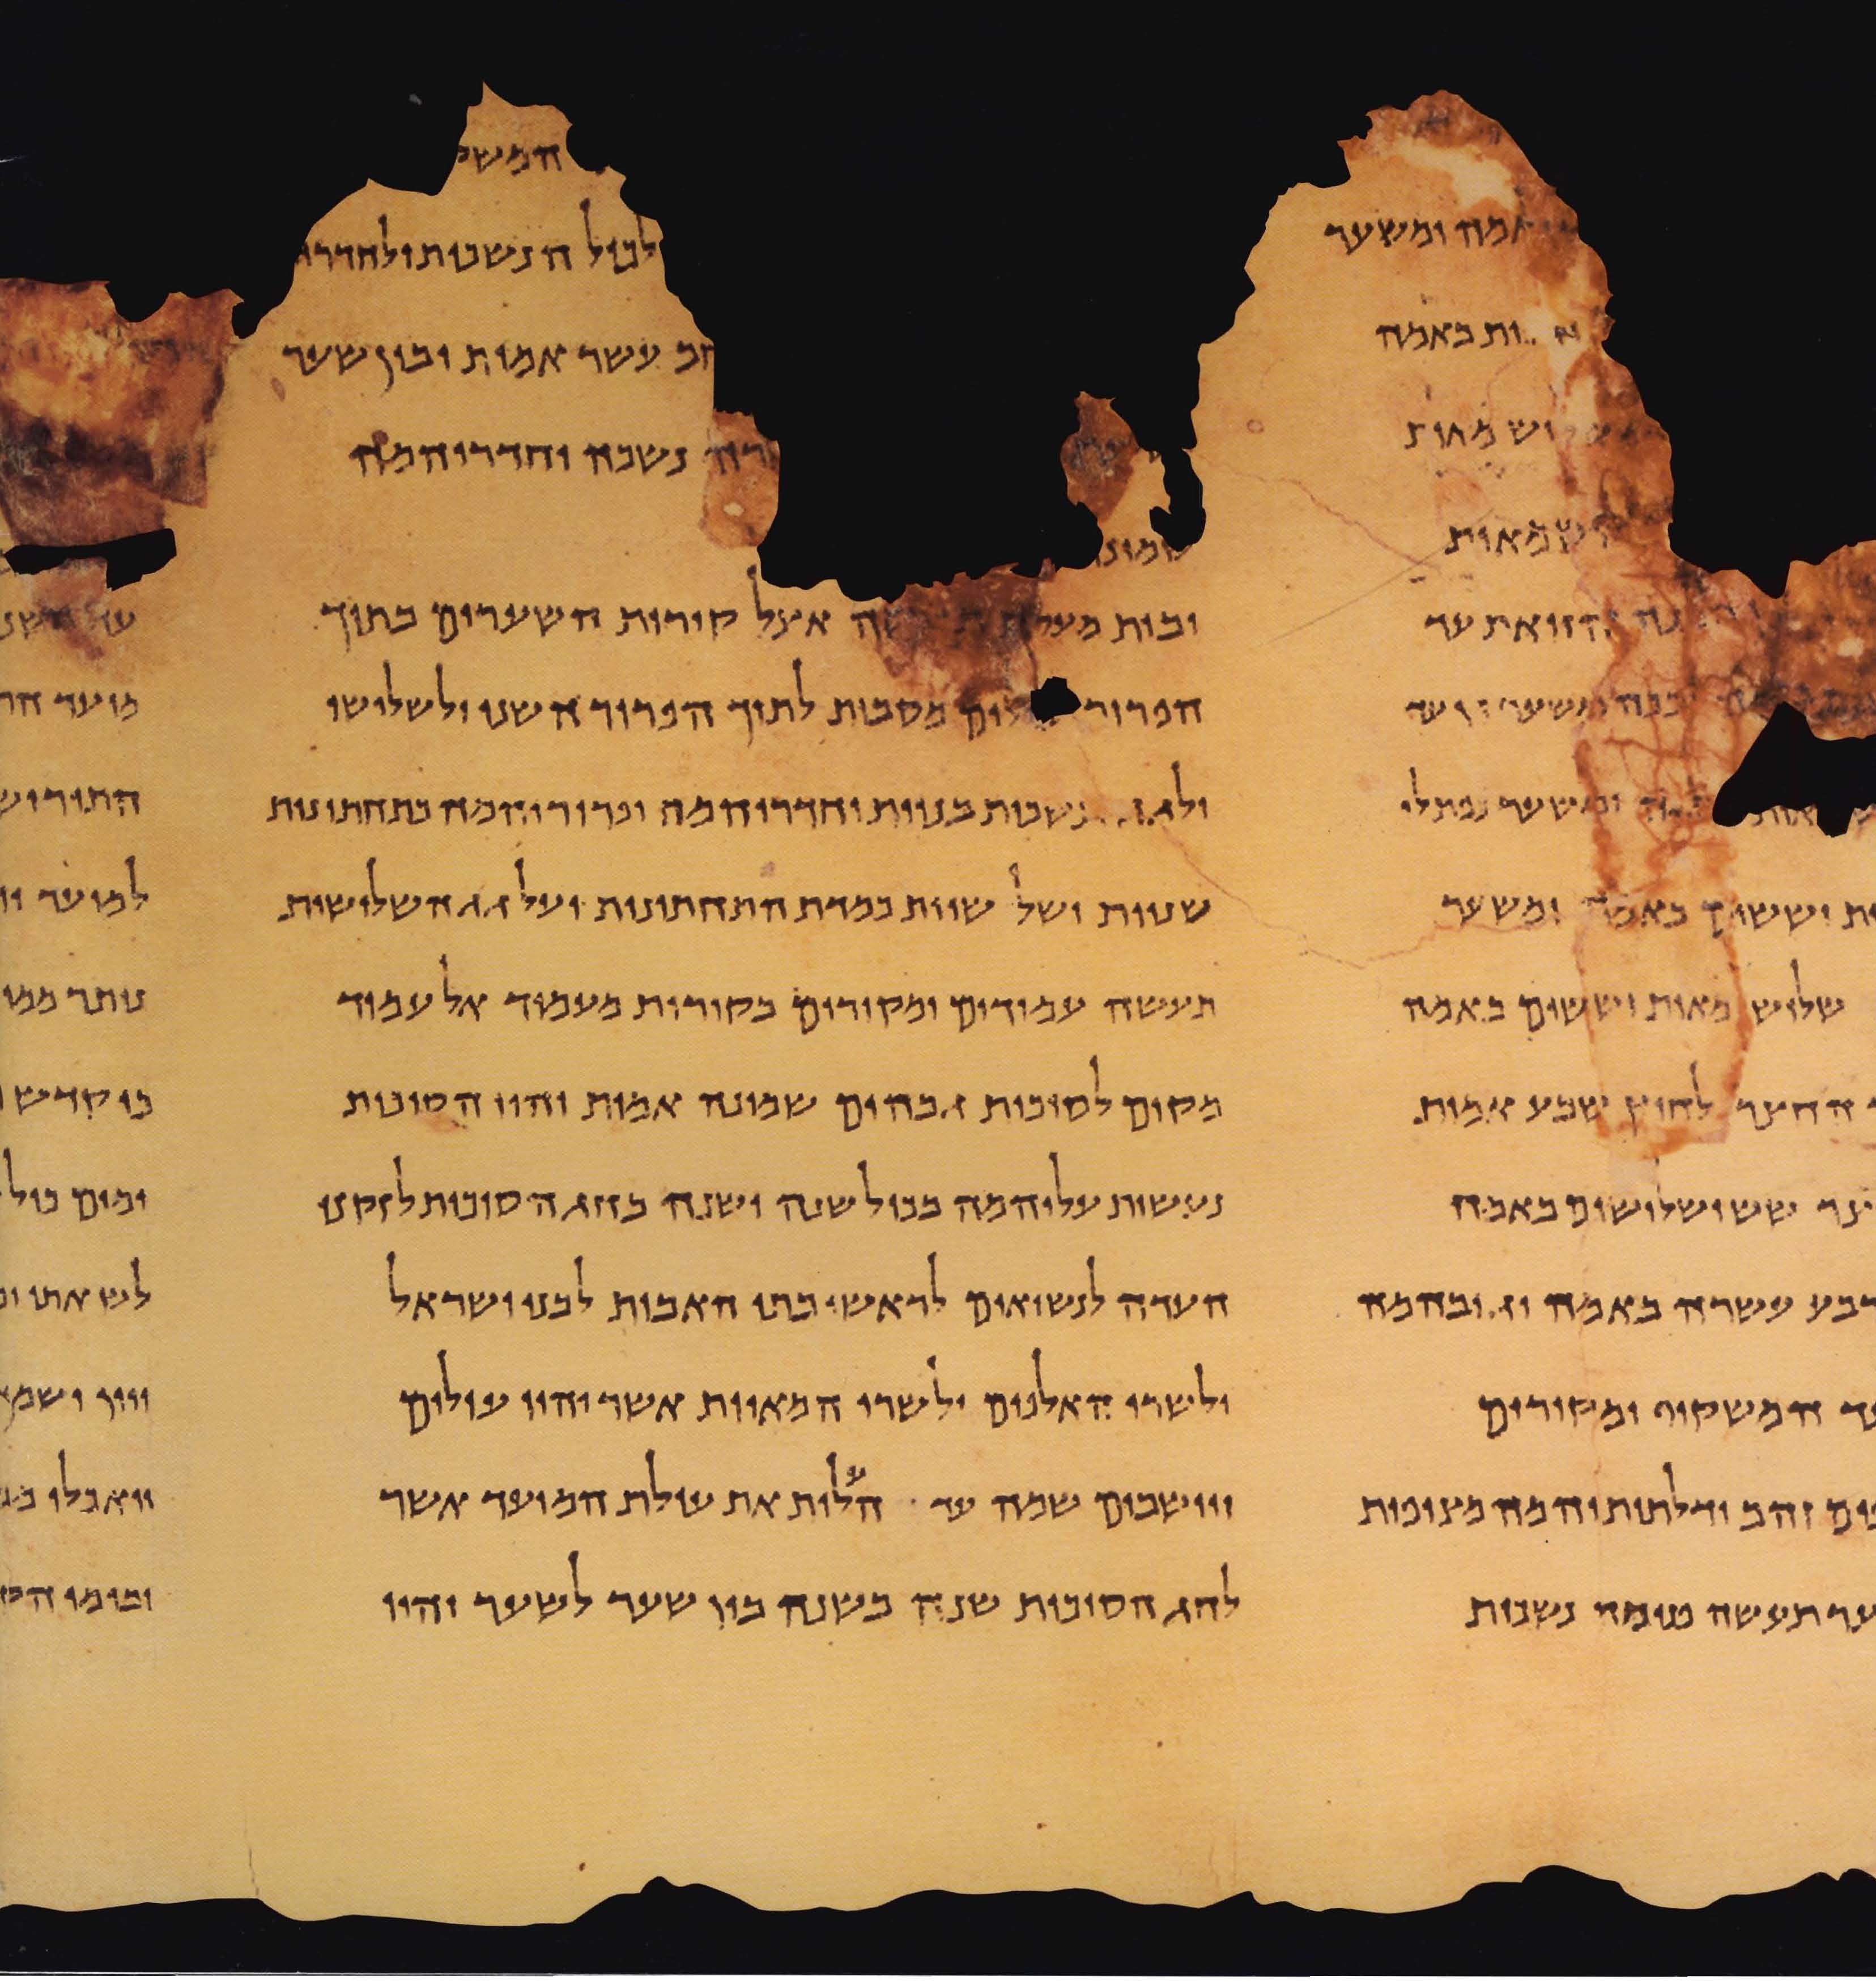 15 Surprising Facts About the Dead Dead Sea Scrolls - NIV Bible